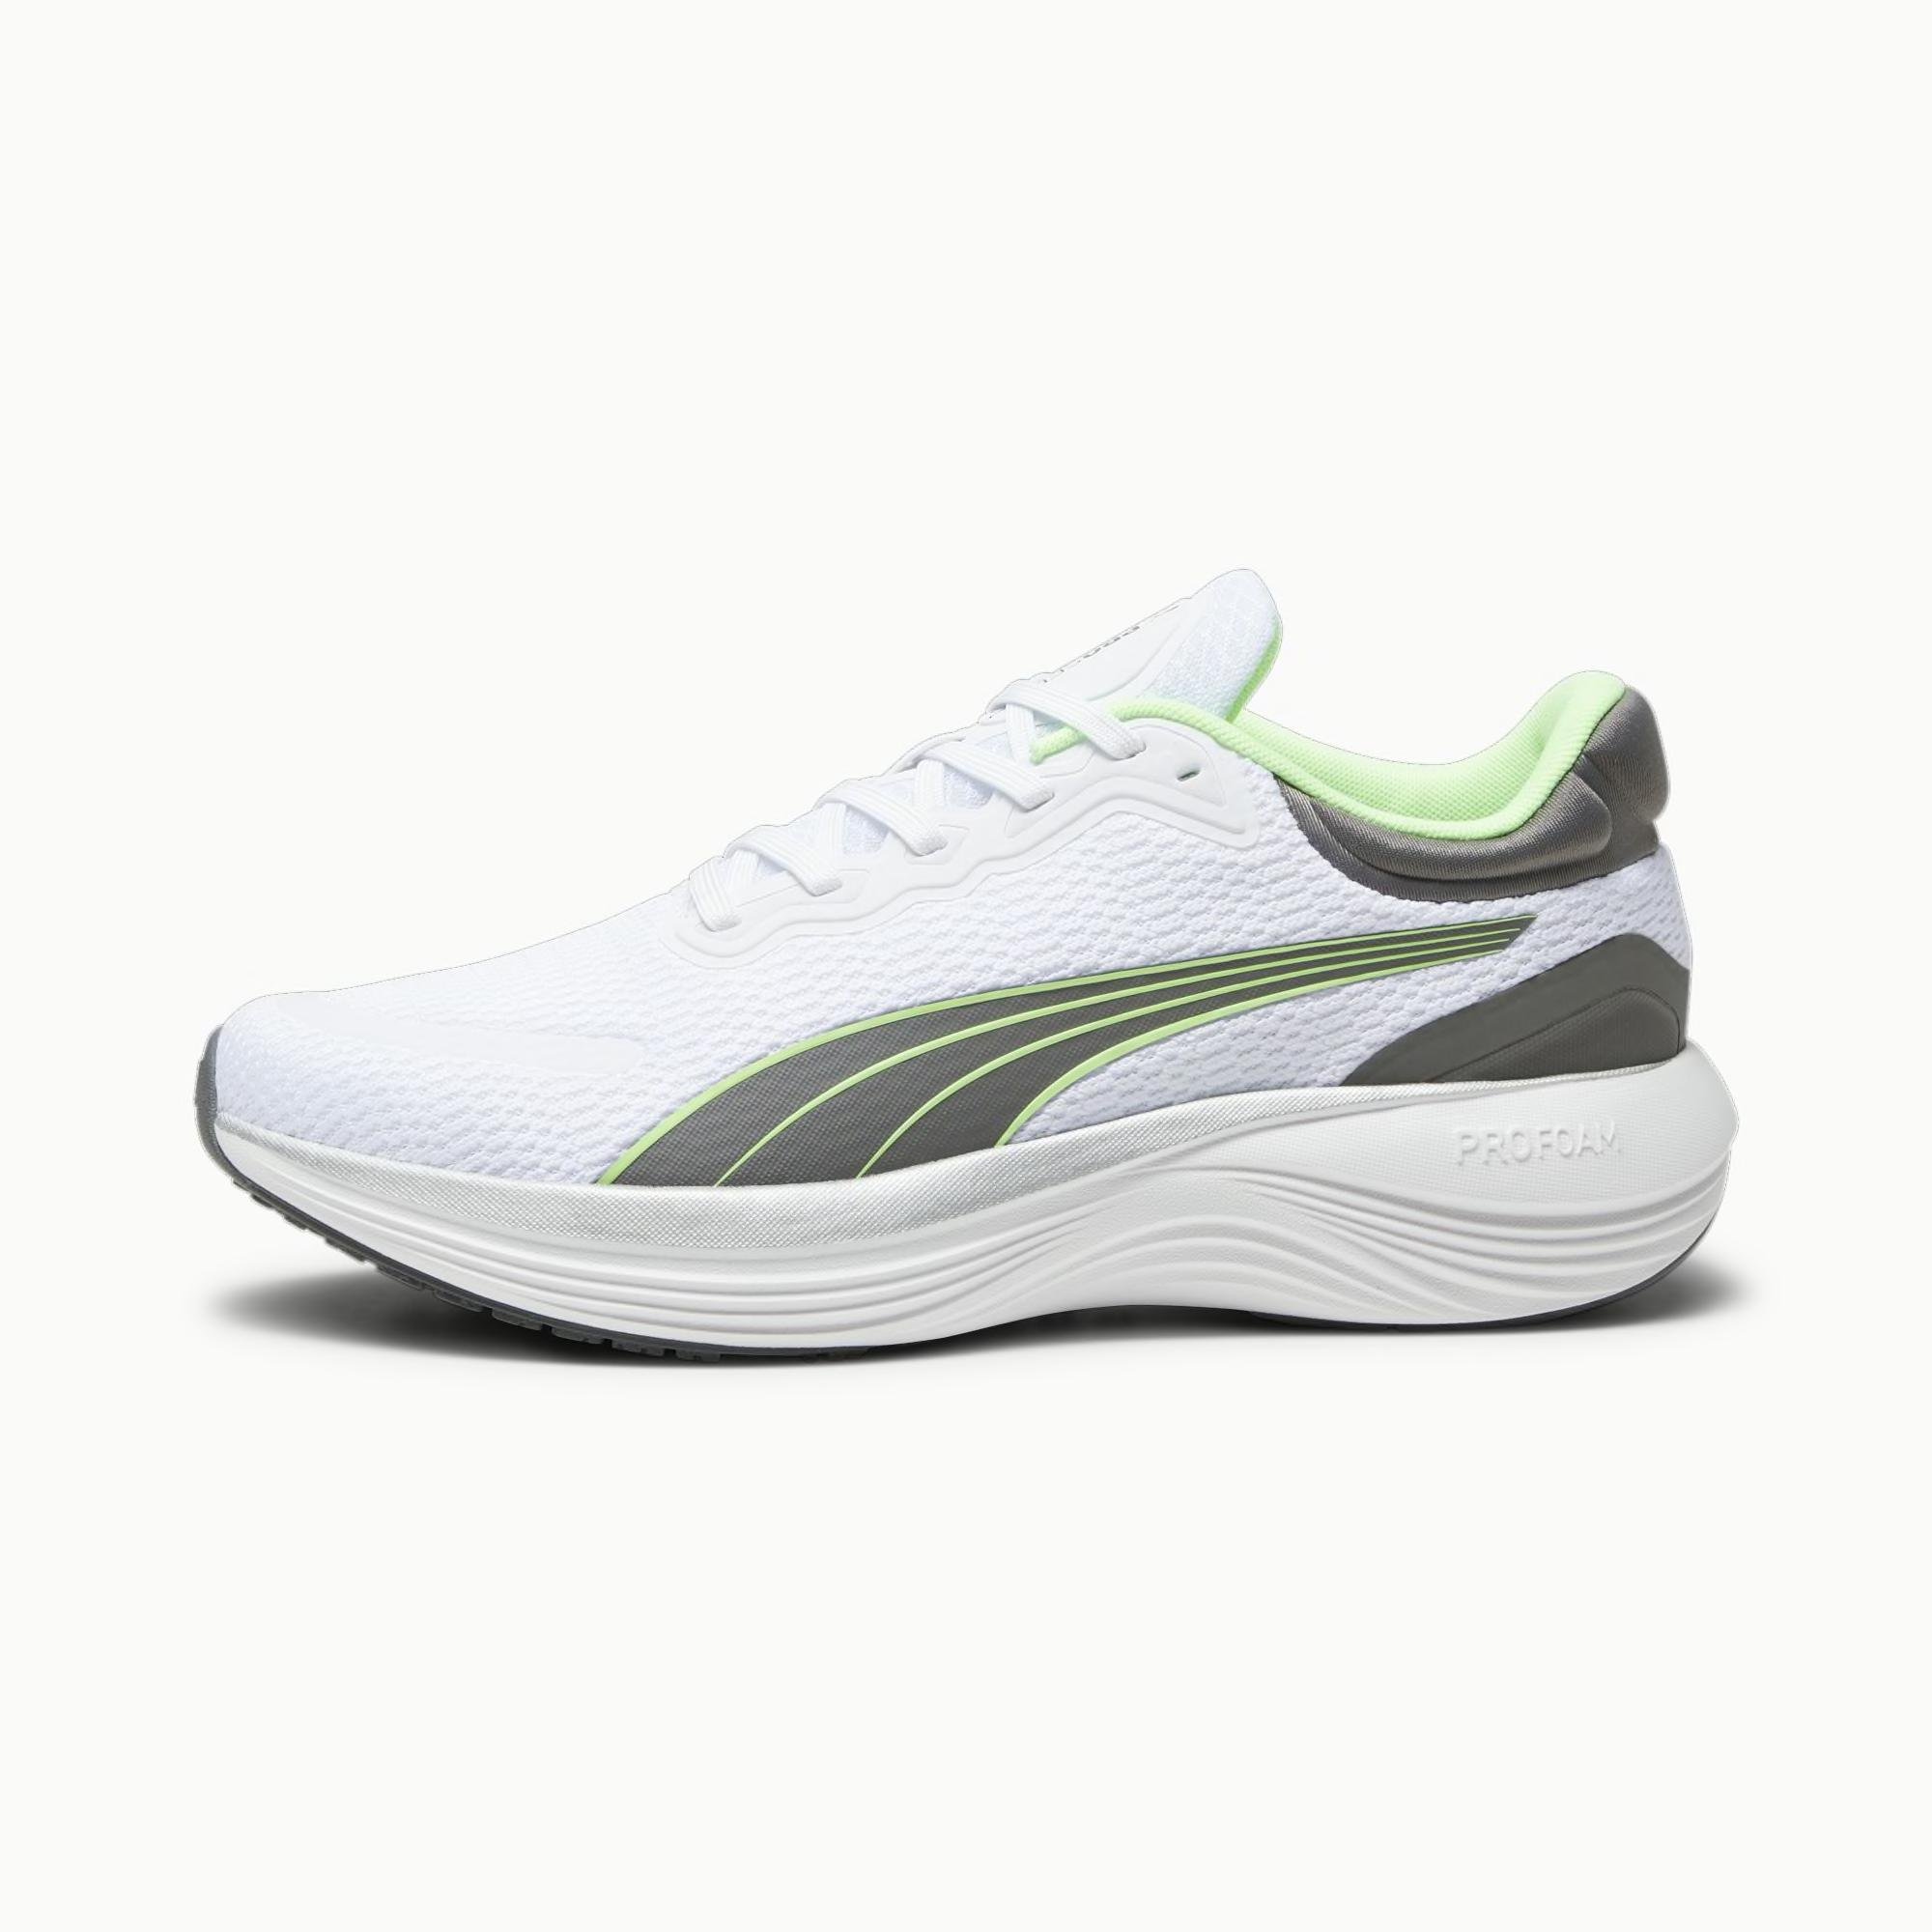 Scend Pro Men's Running Shoes by PUMA